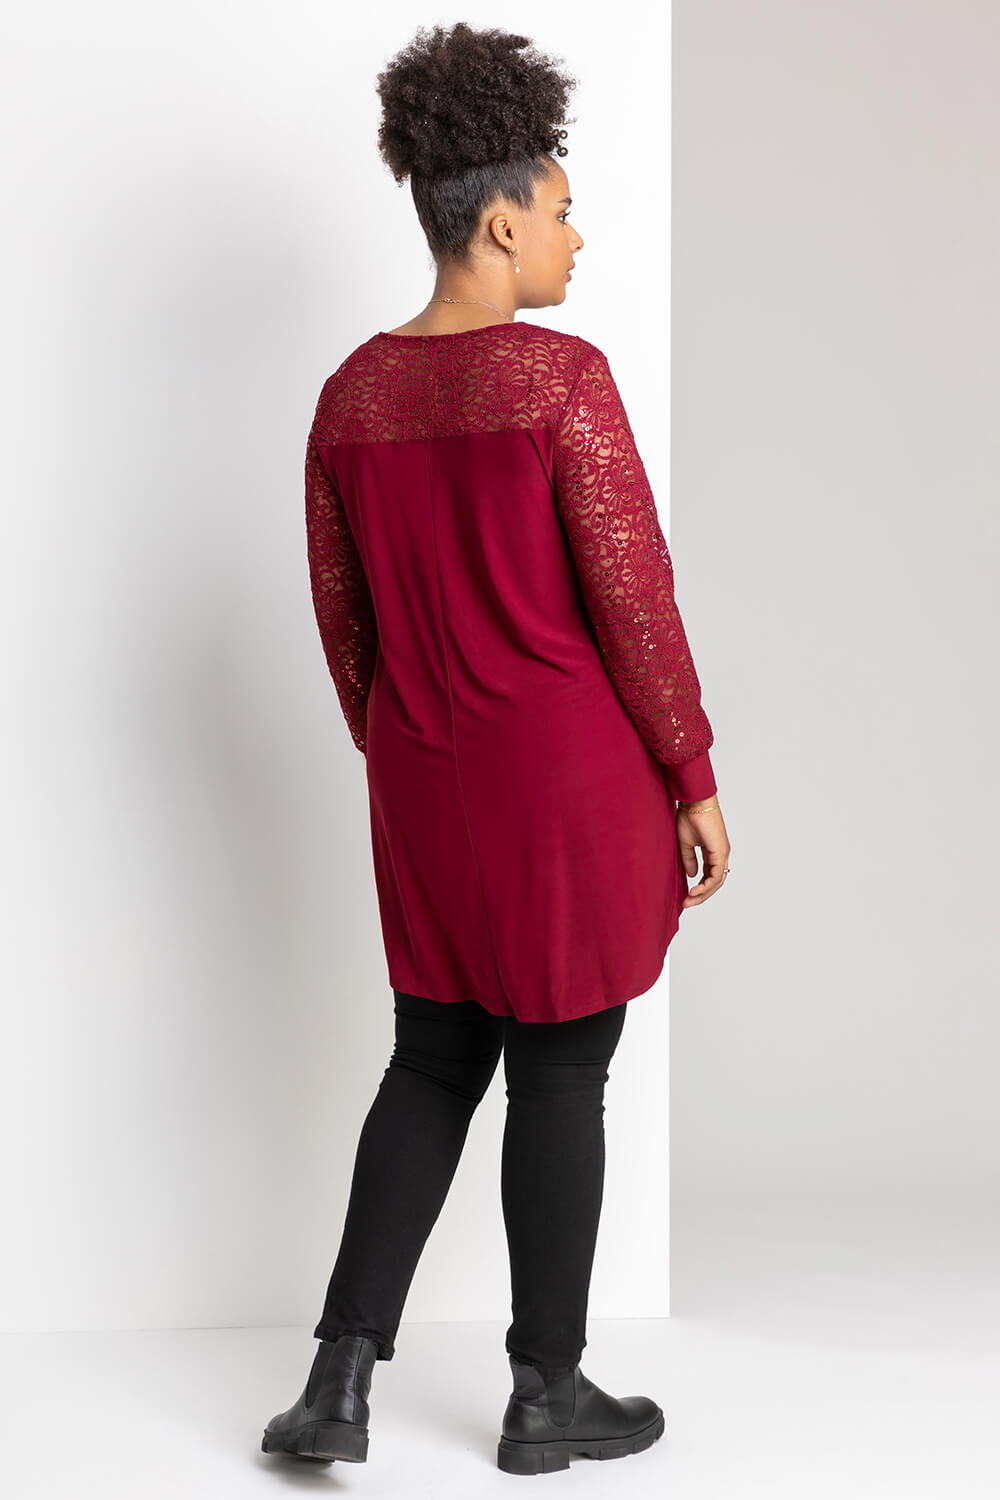 Wine Curve Sequin Lace Yoke Jersey Top, Image 2 of 4